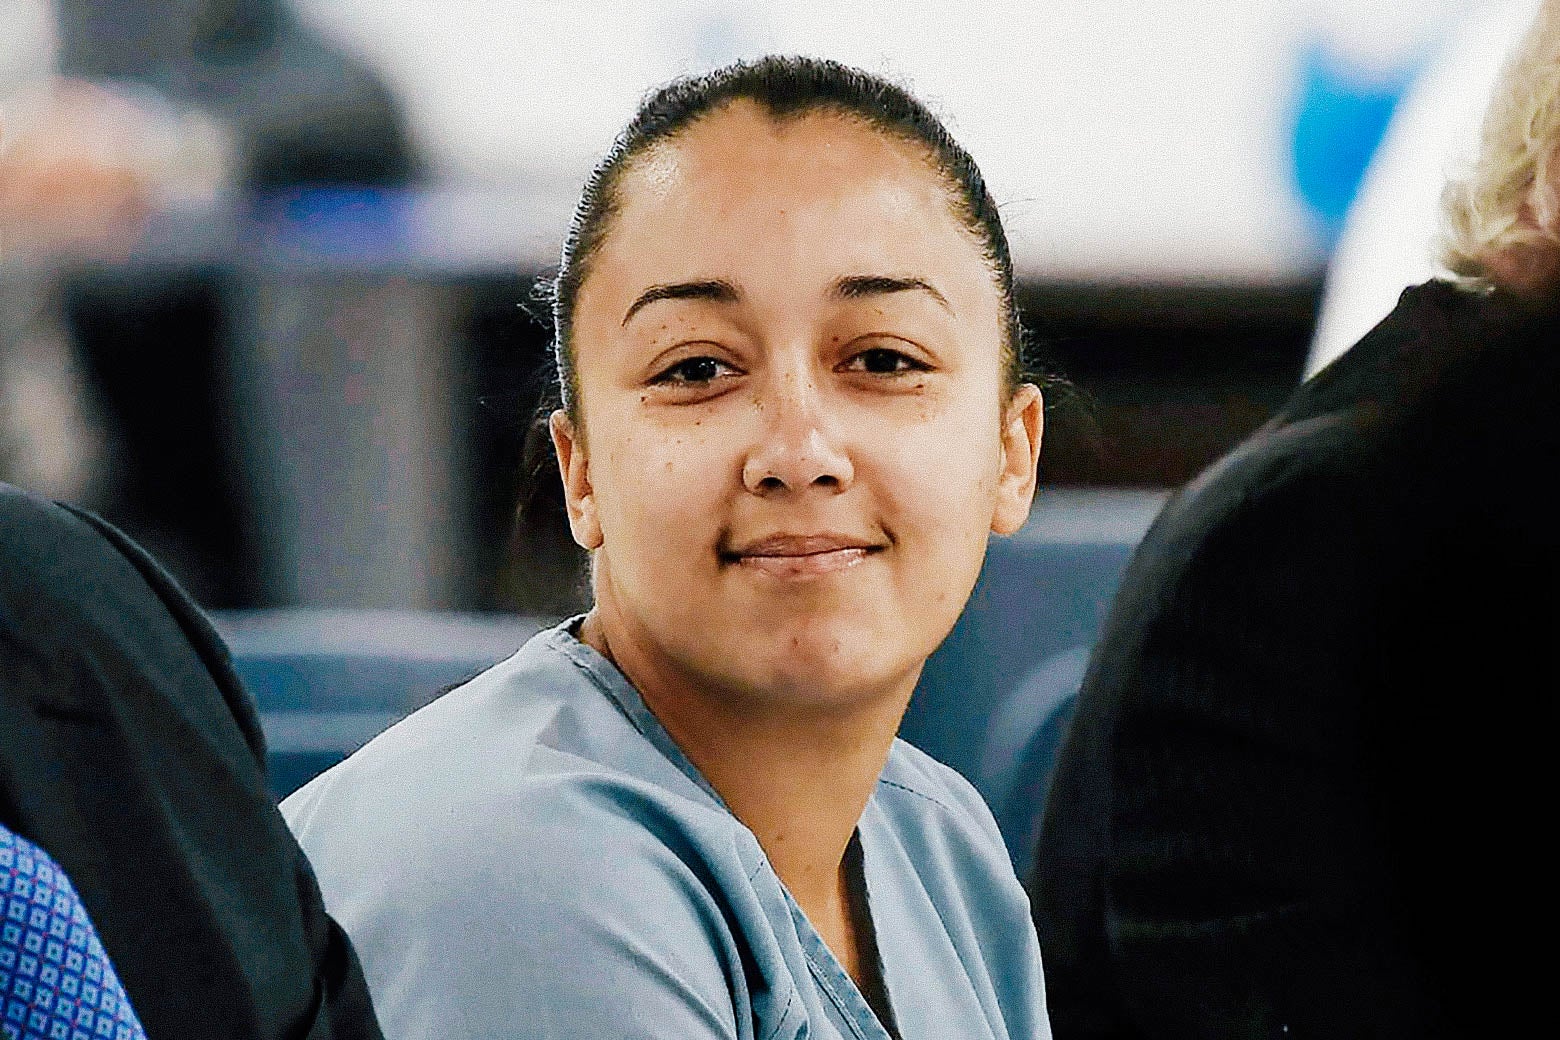 Cyntoia Brown, dressed in prison clothes, smiles toward the camera.